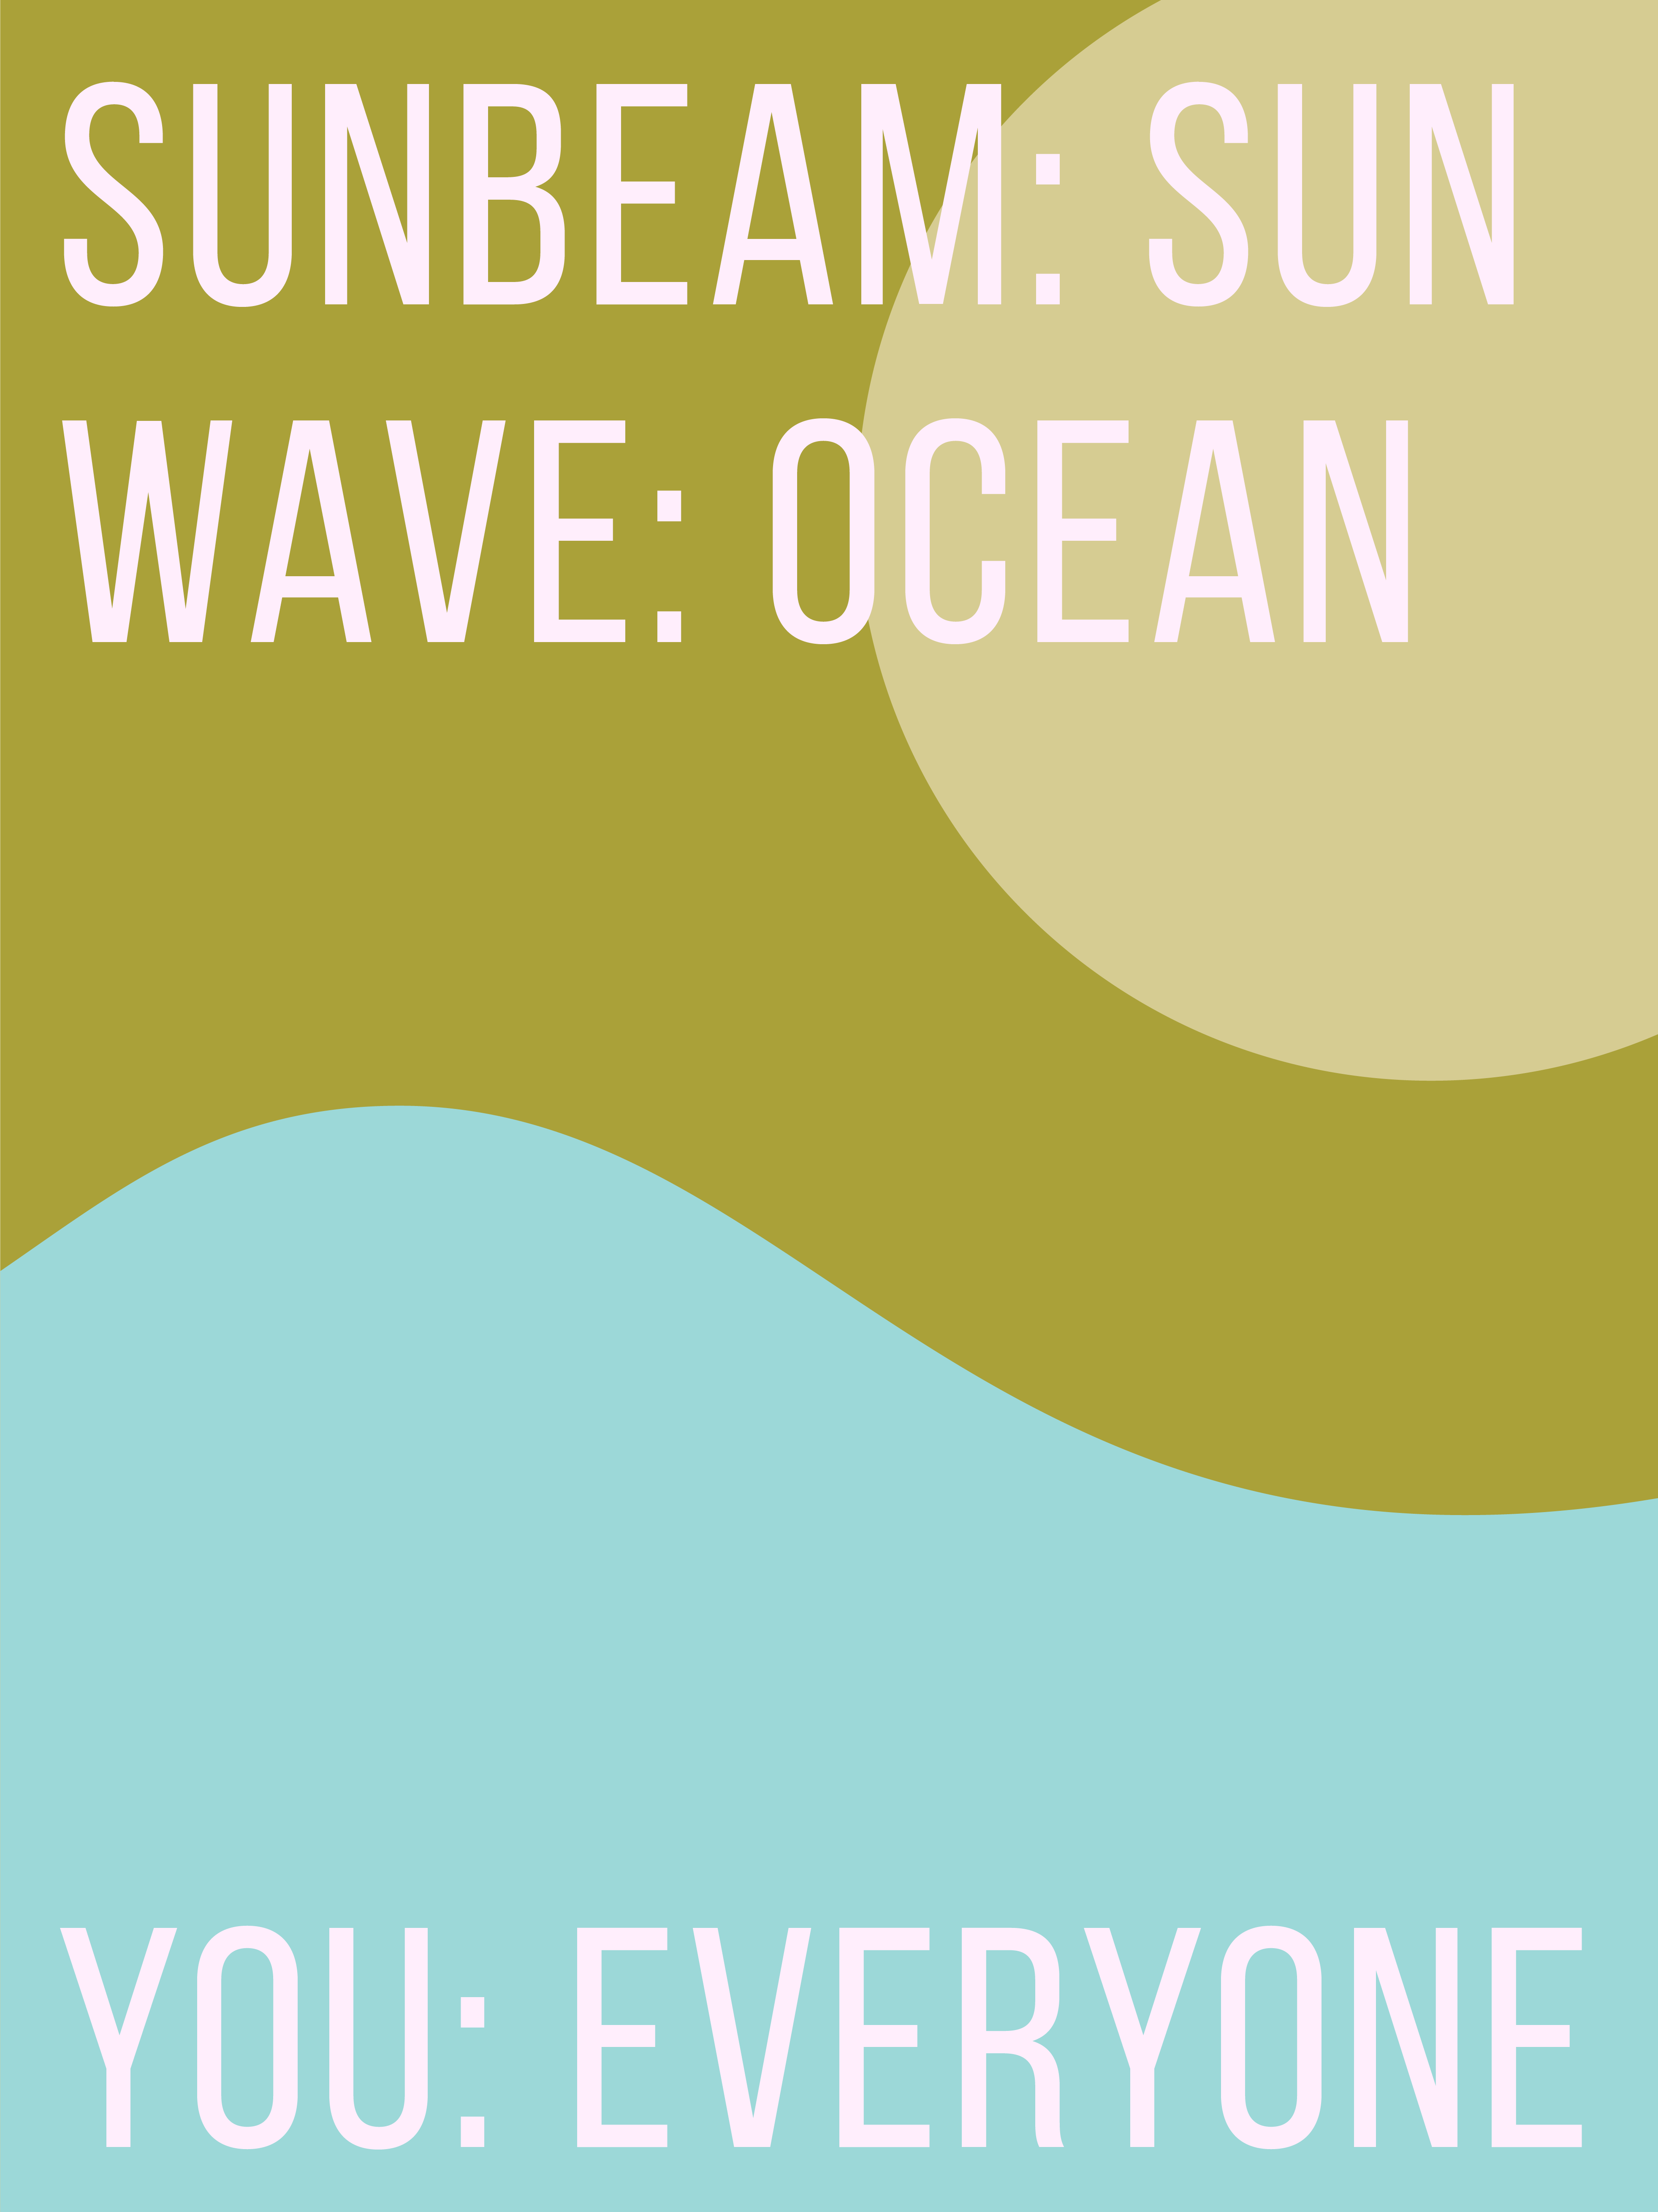 type-based poster stating a sunbeam is the sun, a wave is the ocean, and you are everyone